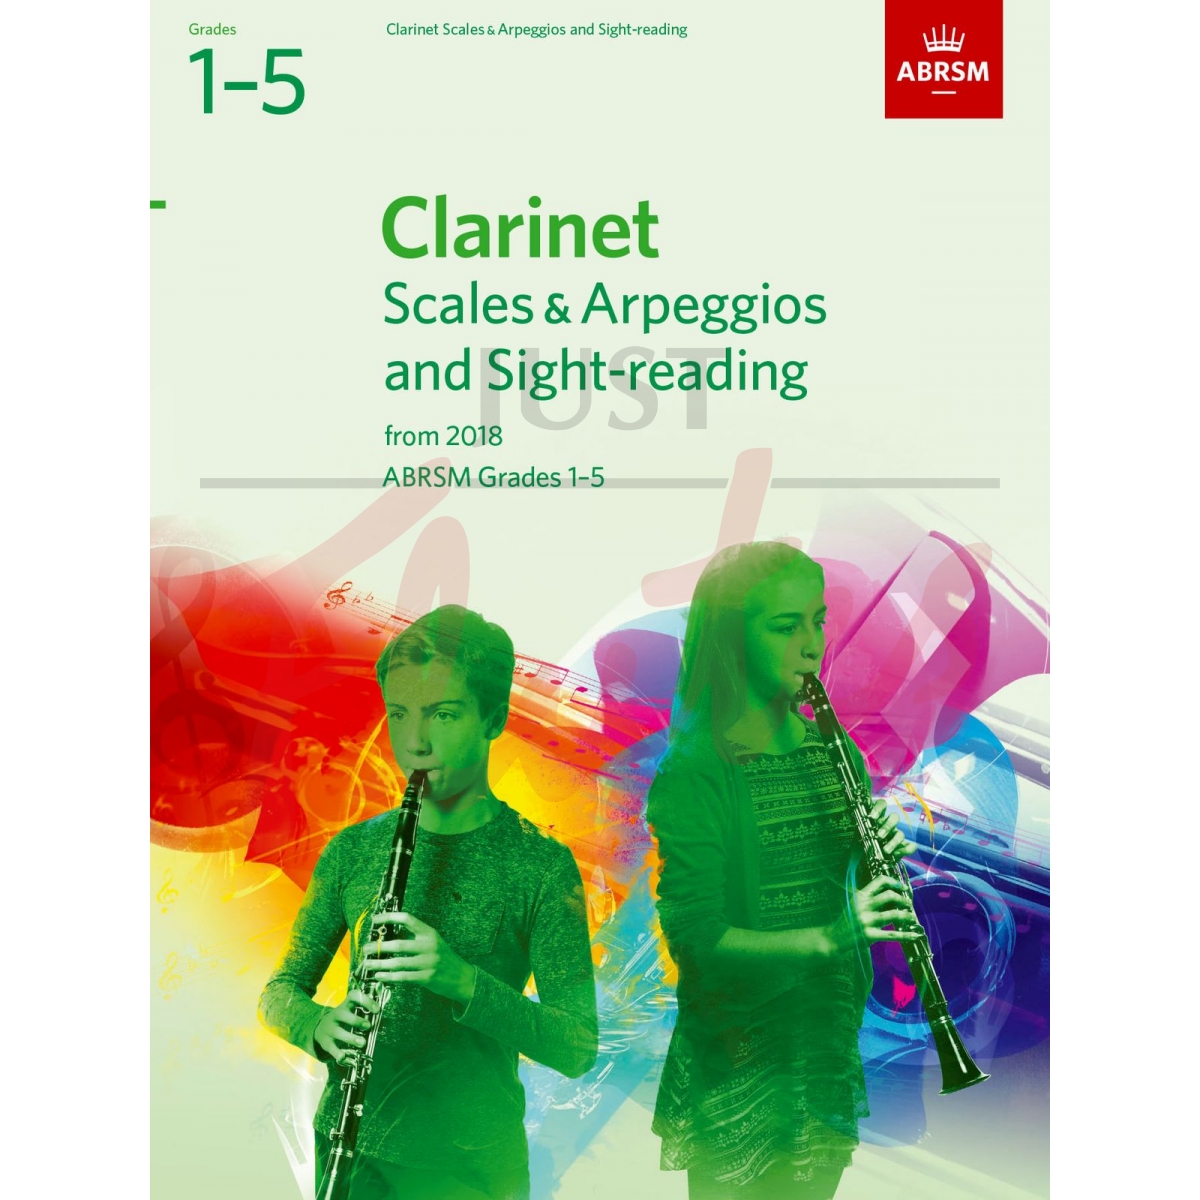 Scales &amp; Arpeggios and Sight-Reading Pack Grades 1-5 (from 2018) [Clarinet]